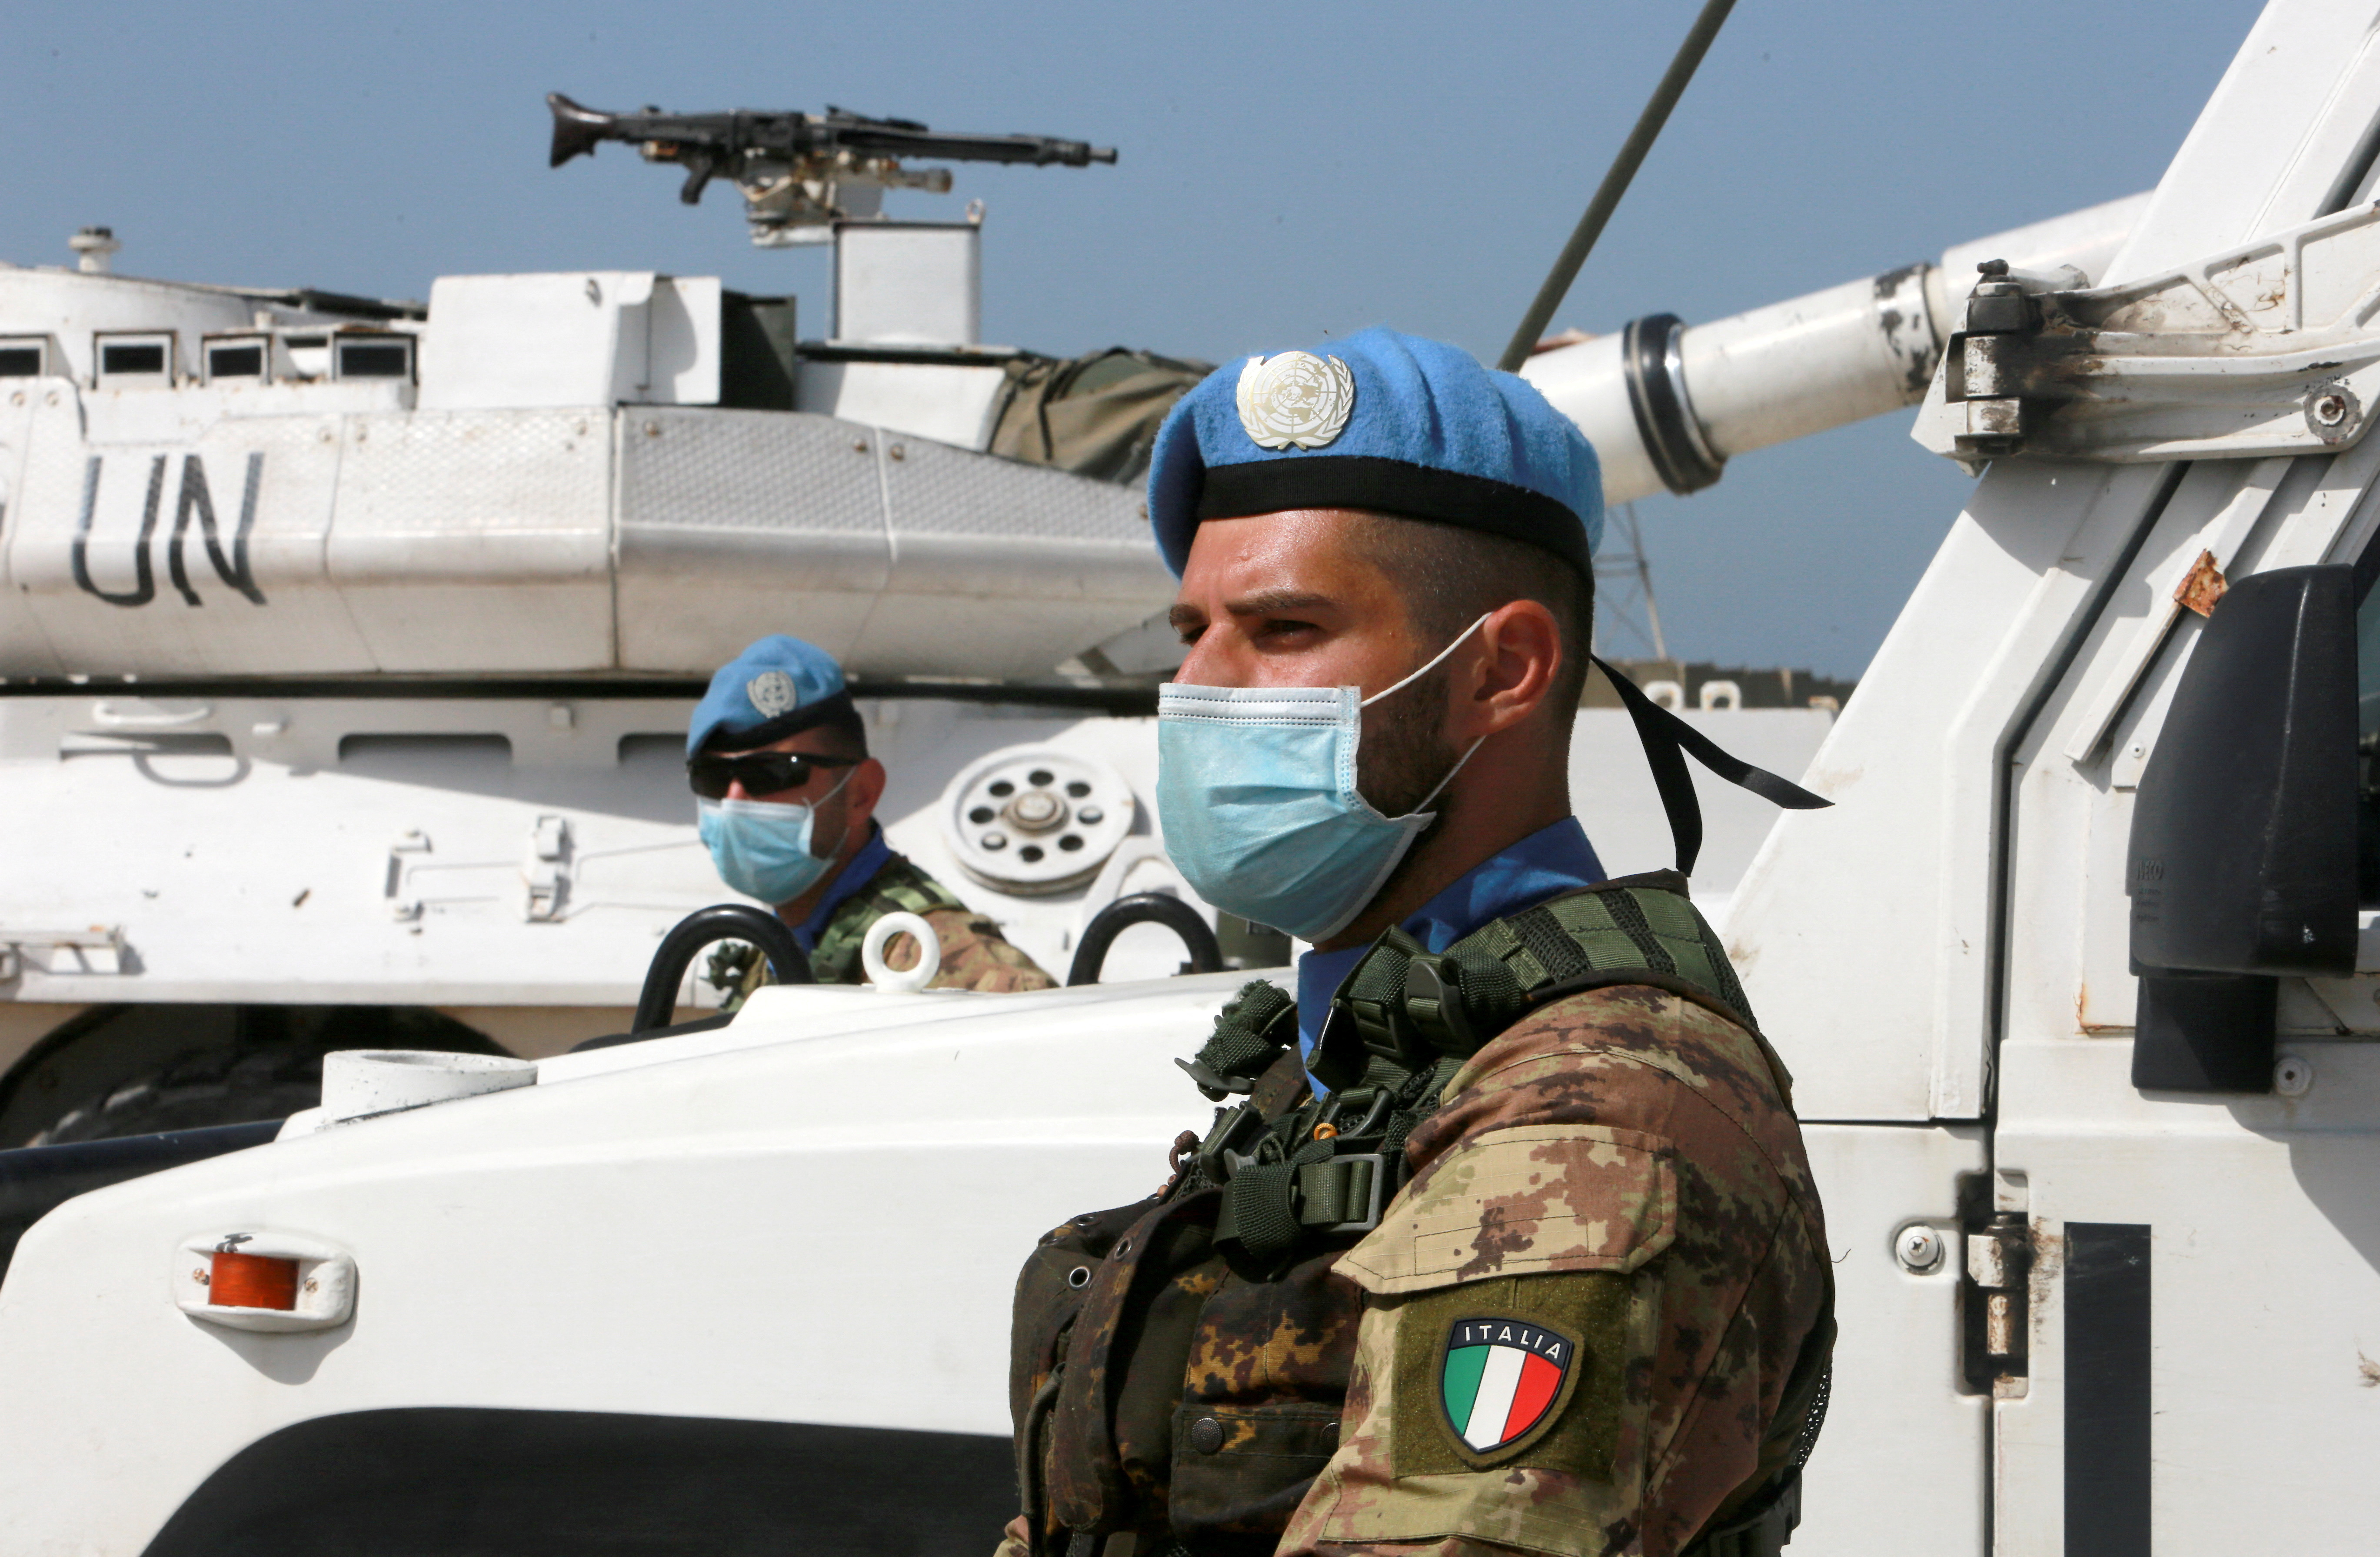 A UN peacekeeper (UNIFIL) wears a face mask as he stands past a UN vehicles in Naqoura